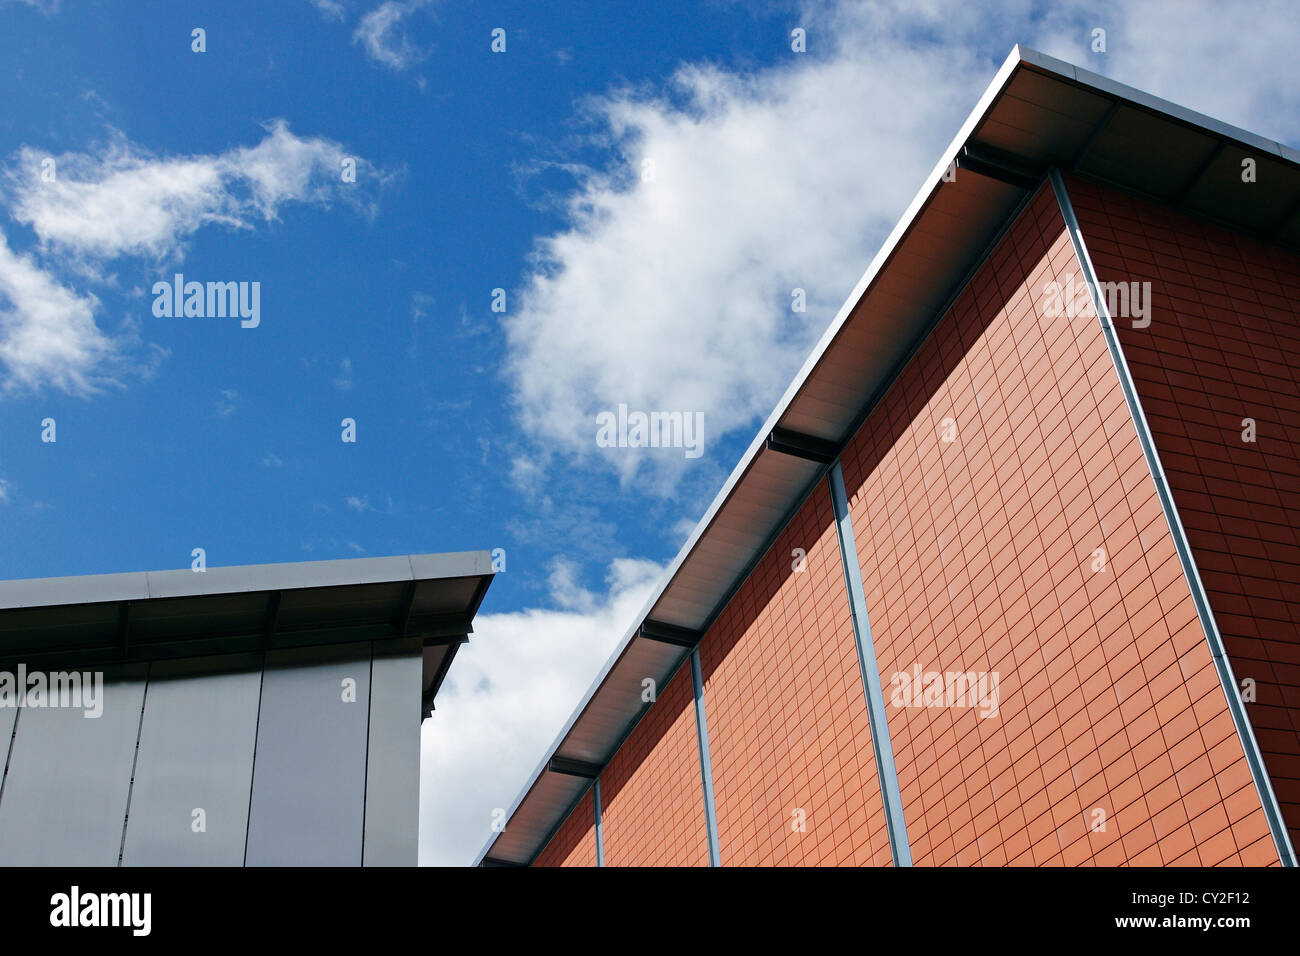 A modern red brick building photographed against a blue sky. Stock Photo